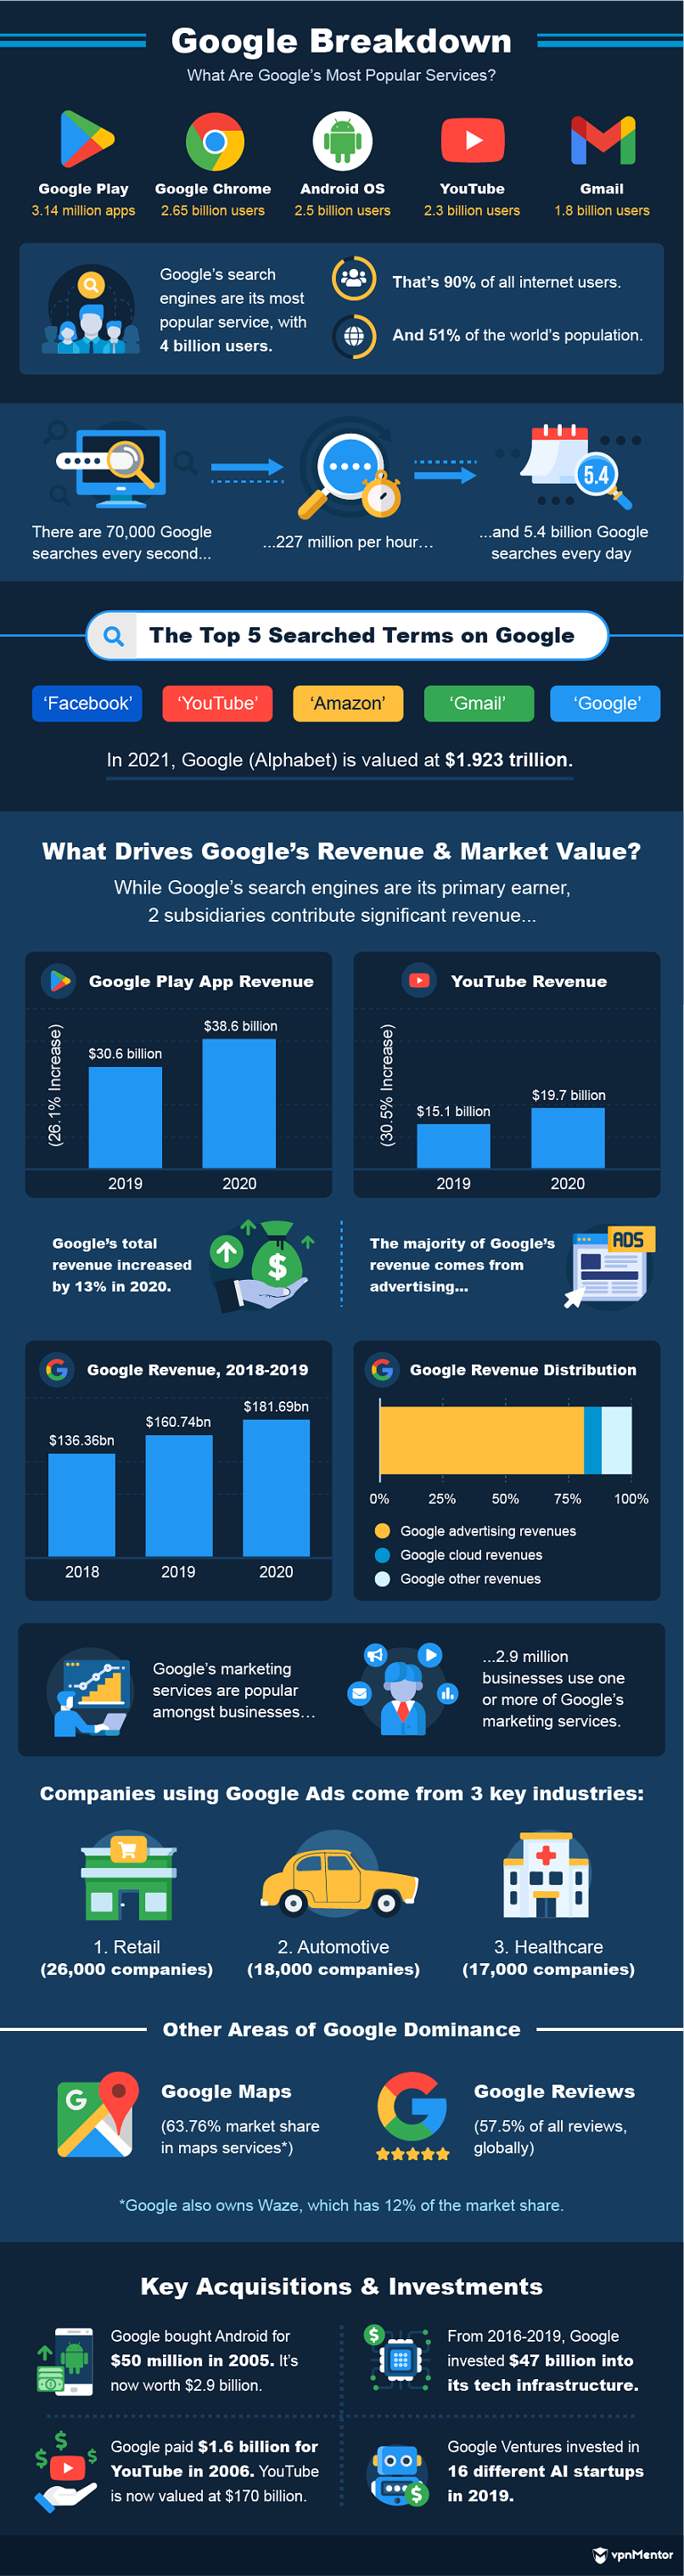 Google products and services